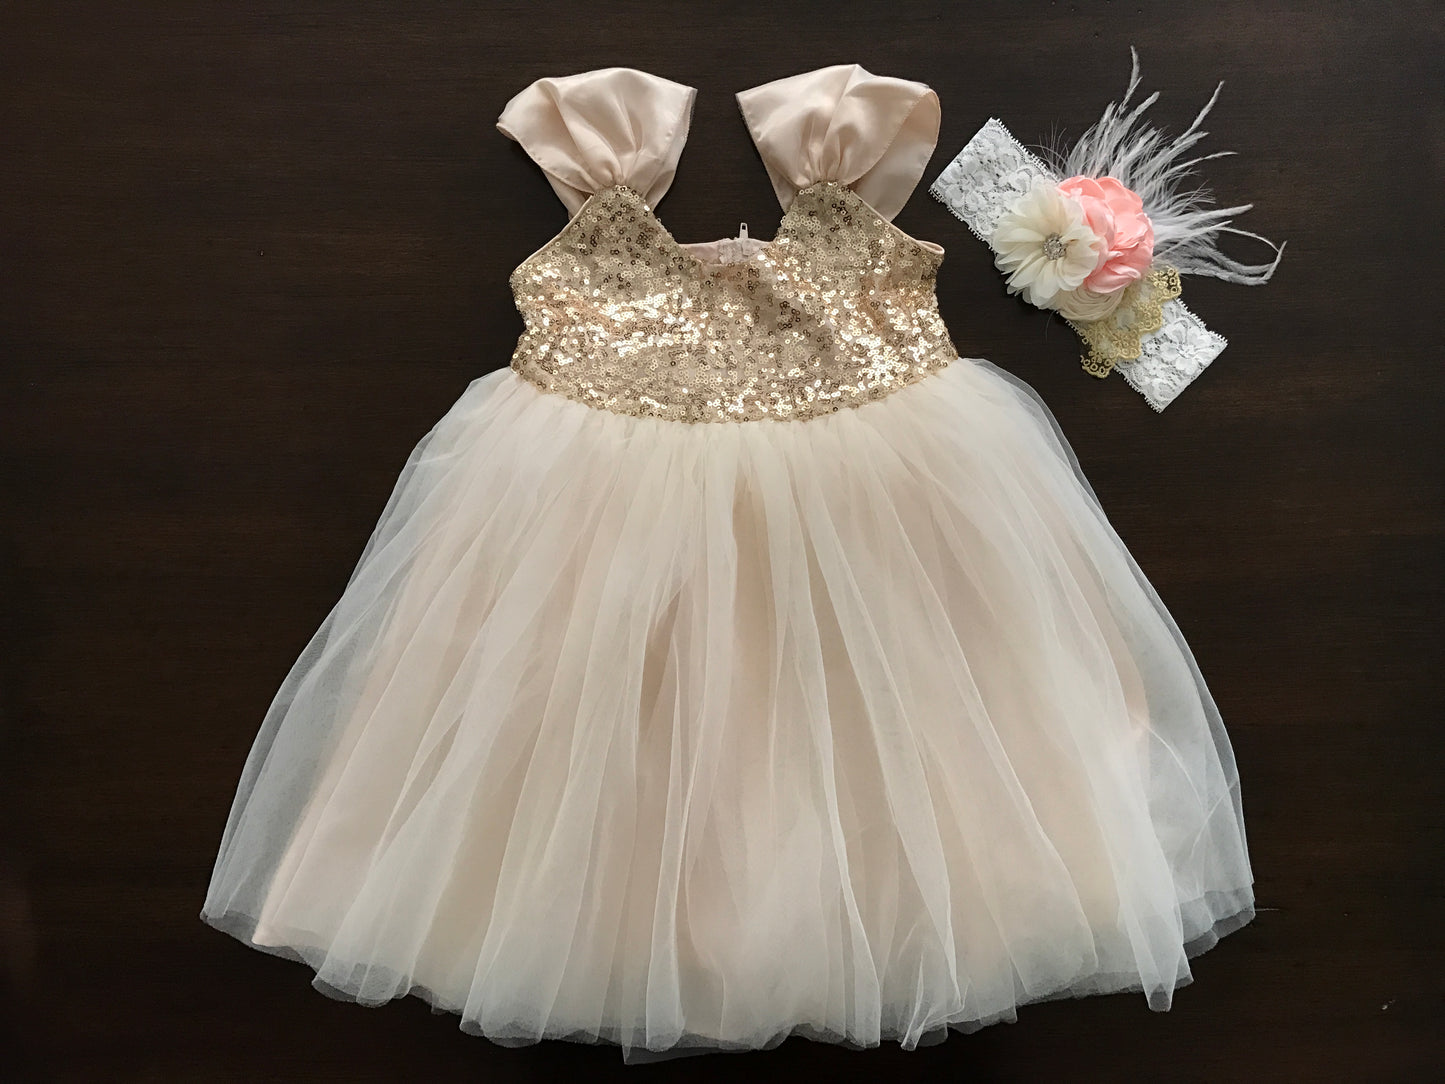 Gold Sequin Flower Girl Dress with Peach and Ivory Headband